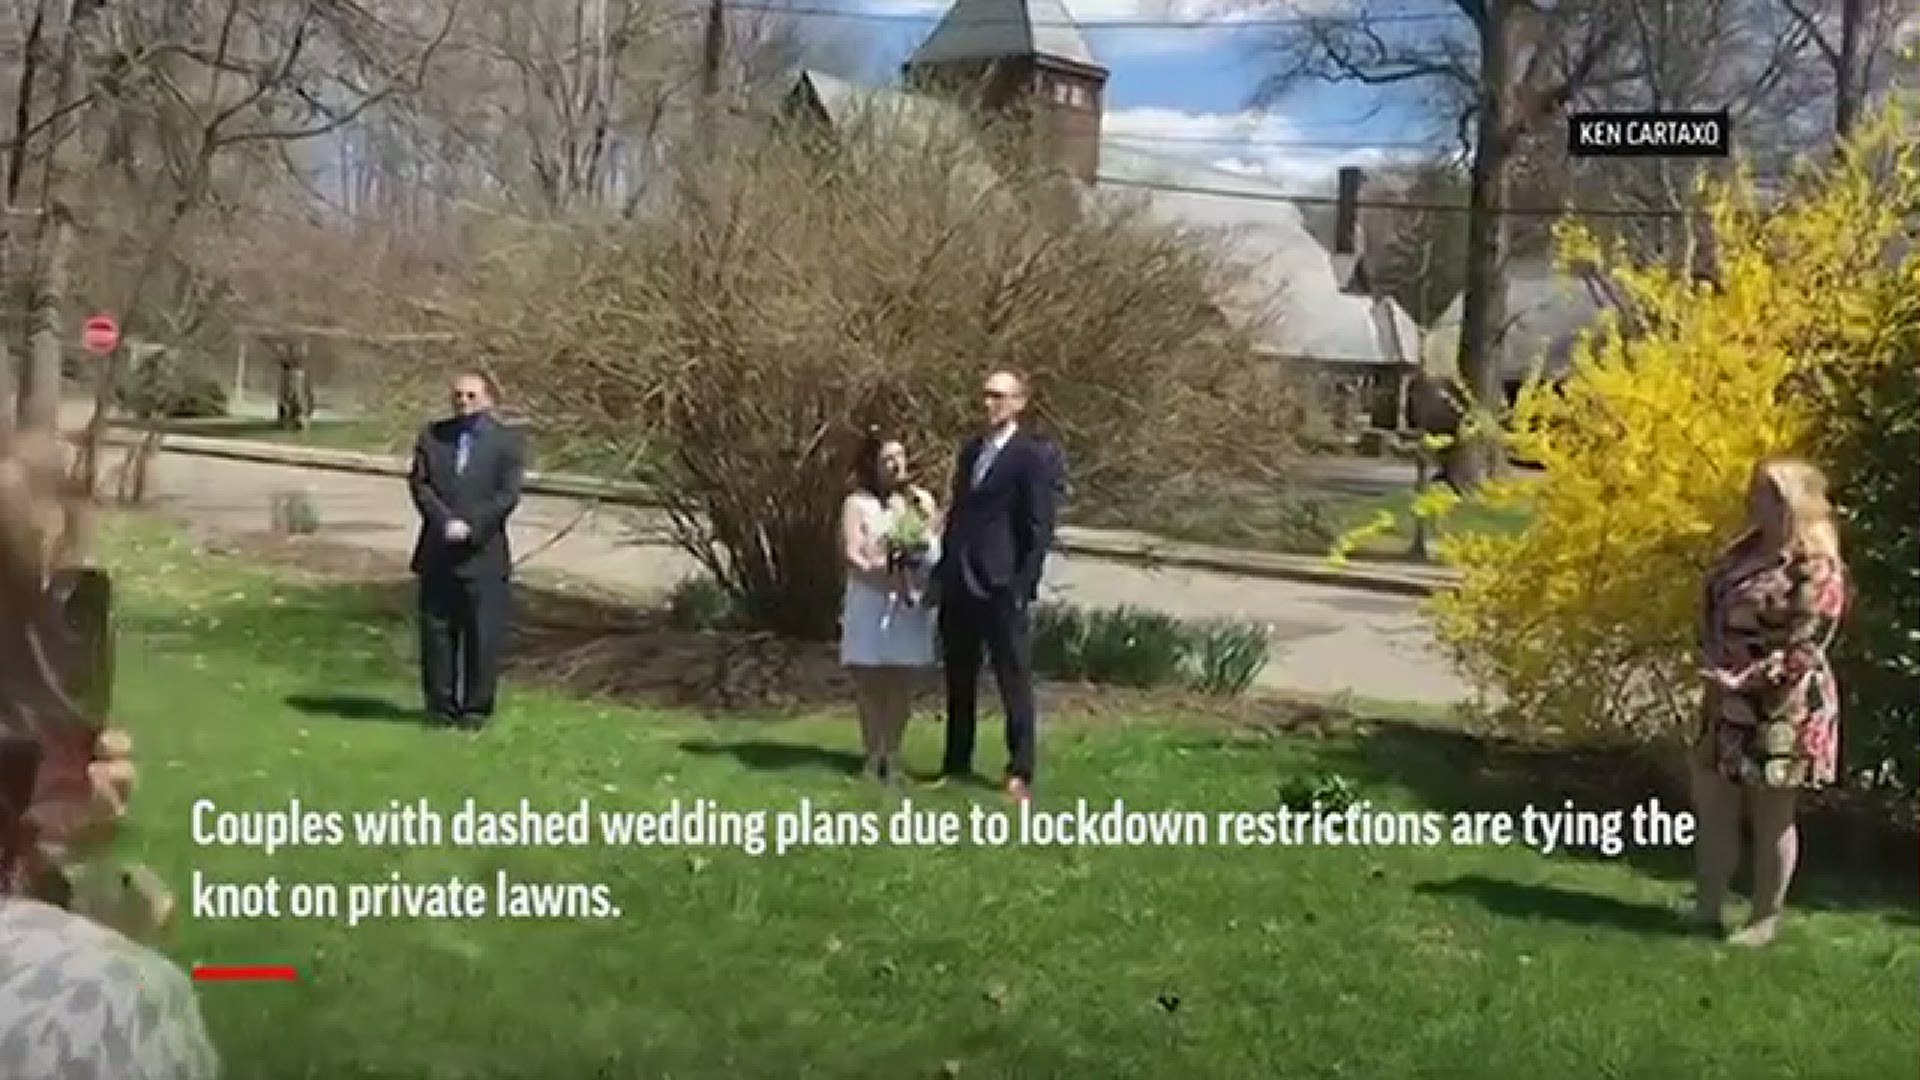 Couples with dashed wedding plans due to lockdown restrictions have been tying the knot on those tidy green spreads instead.